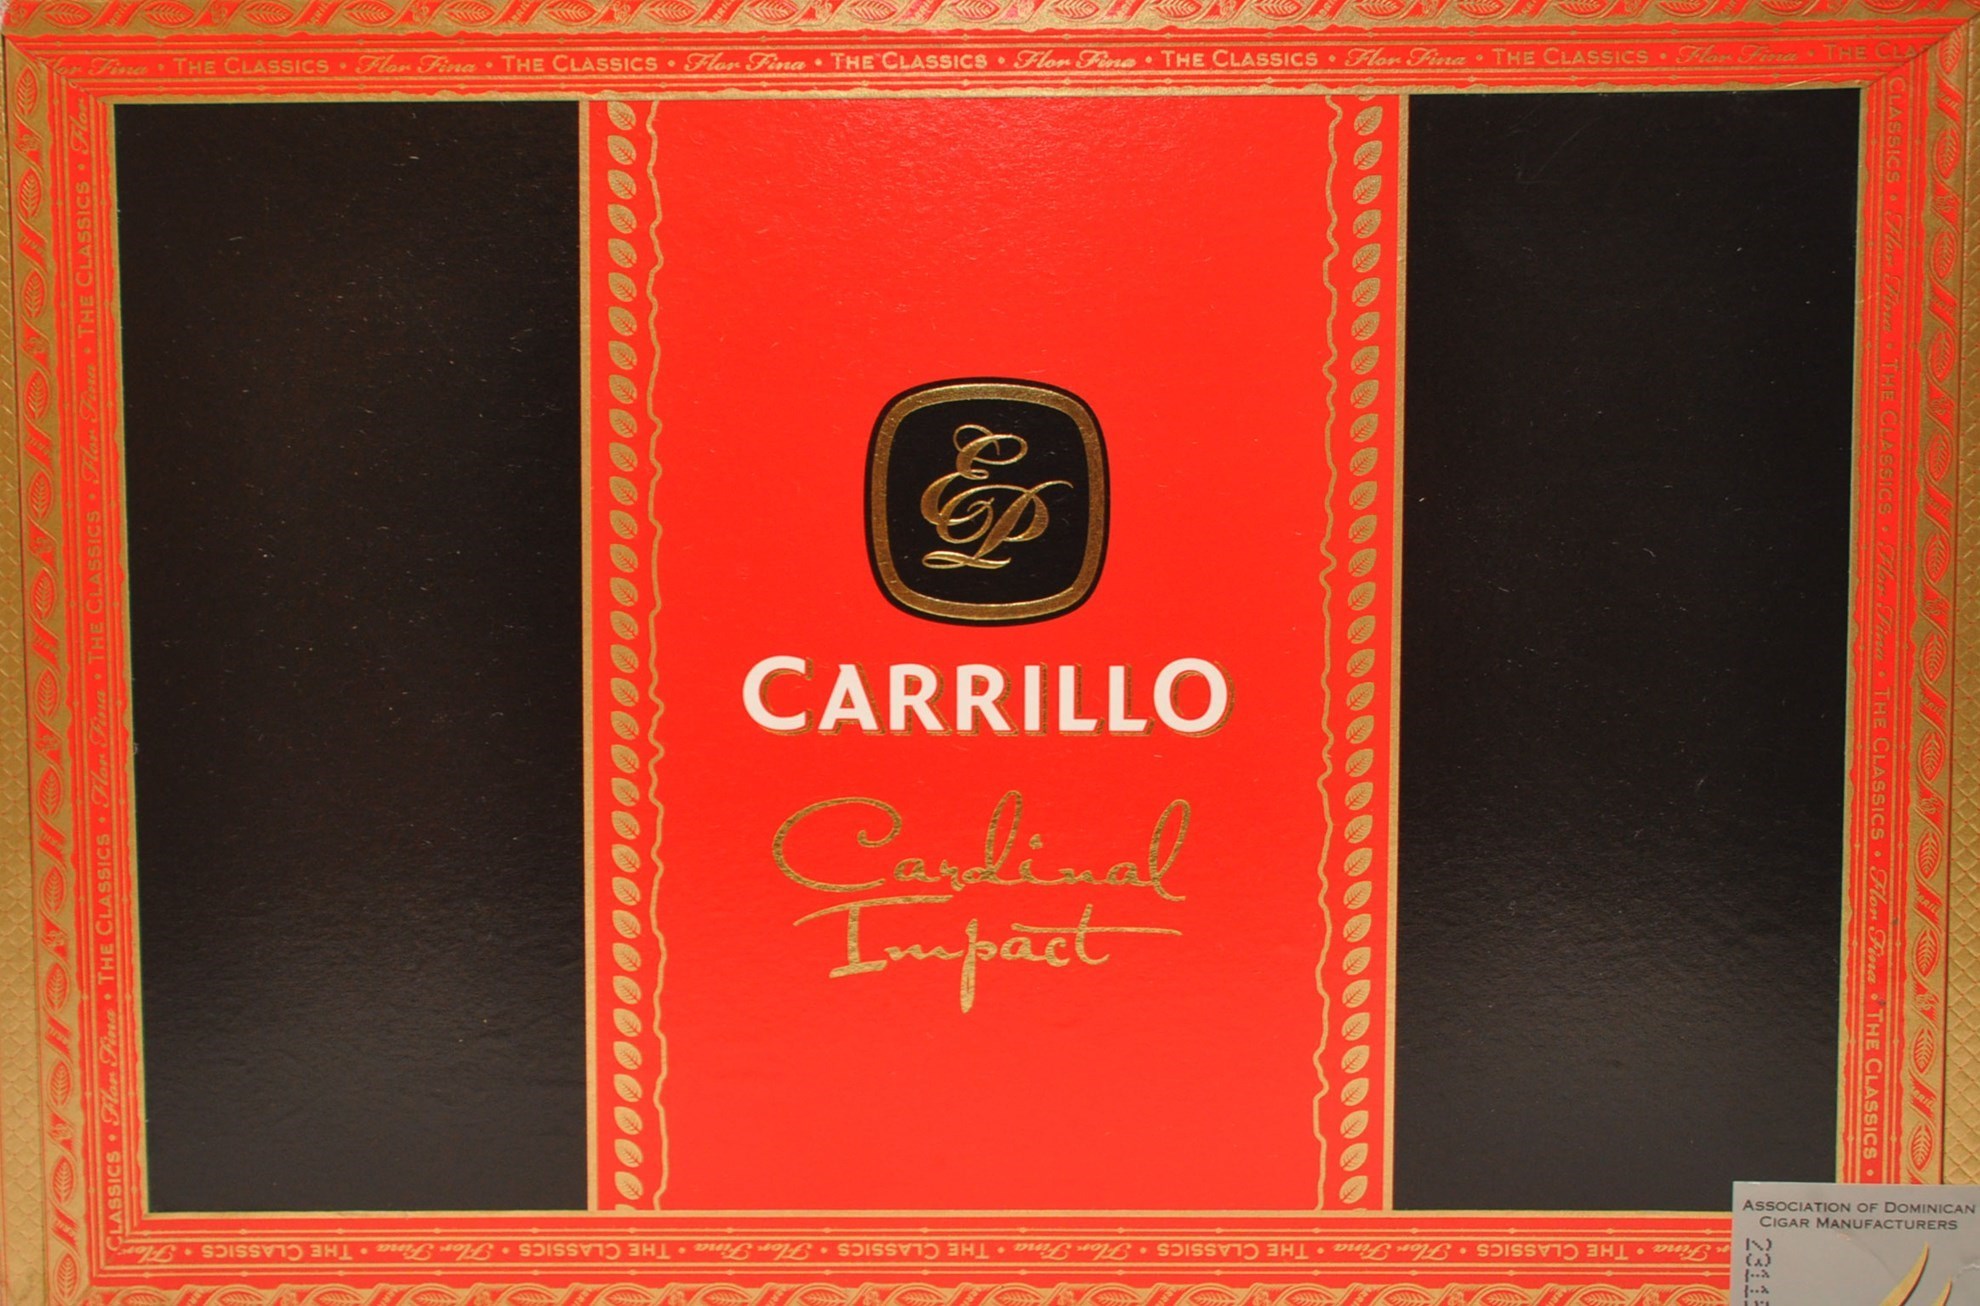 Buy . Carrillo Cardinal Impact Maduro Cigars Online at Small Batch Cigar  | Best Online Cigar Shopping Experience Around!